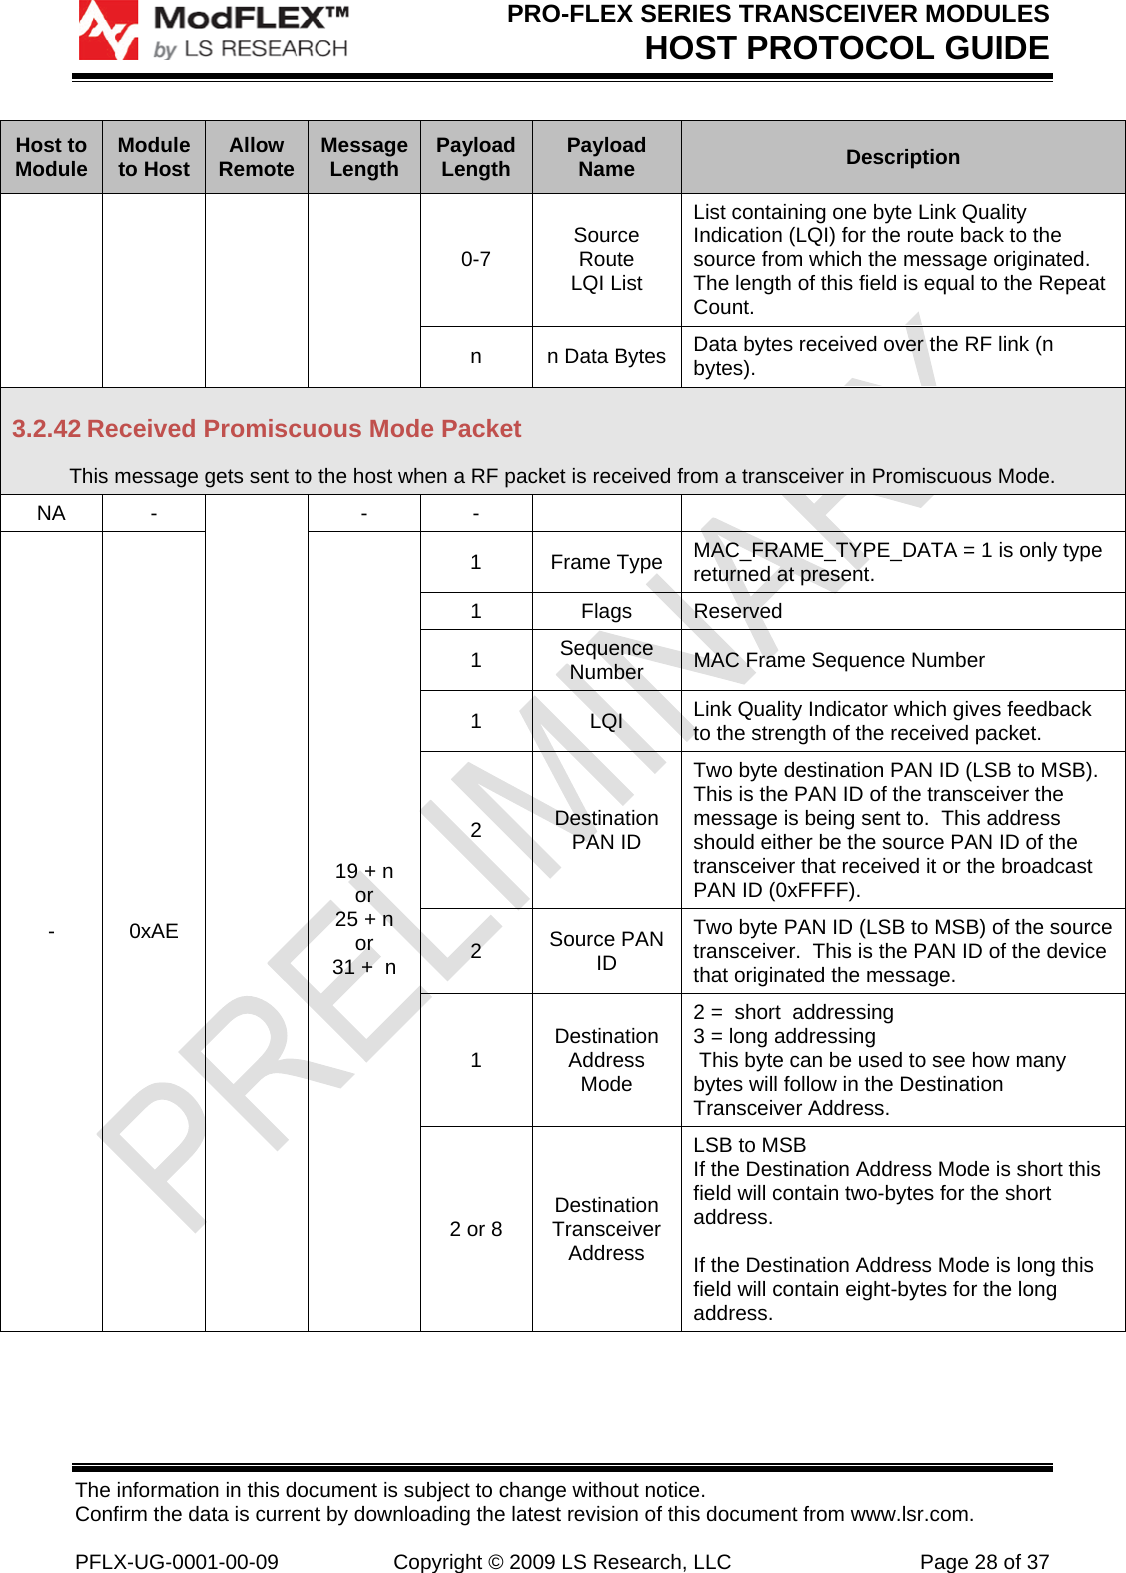 PRO-FLEX SERIES TRANSCEIVER MODULES HOST PROTOCOL GUIDE The information in this document is subject to change without notice. Confirm the data is current by downloading the latest revision of this document from www.lsr.com.  PFLX-UG-0001-00-09  Copyright © 2009 LS Research, LLC  Page 28 of 37 Host to Module  Module to Host  Allow Remote  Message Length  Payload Length  Payload Name  Description 0-7  Source Route LQI List List containing one byte Link Quality Indication (LQI) for the route back to the source from which the message originated.  The length of this field is equal to the Repeat Count. n  n Data Bytes  Data bytes received over the RF link (n bytes). 3.2.42 Received Promiscuous Mode Packet This message gets sent to the host when a RF packet is received from a transceiver in Promiscuous Mode. NA -  - -    - 0xAE 19 + n or 25 + n or 31 +  n  1 Frame Type MAC_FRAME_TYPE_DATA = 1 is only type returned at present. 1 Flags Reserved 1  Sequence Number  MAC Frame Sequence Number 1 LQI Link Quality Indicator which gives feedback to the strength of the received packet.  2  Destination PAN ID Two byte destination PAN ID (LSB to MSB).  This is the PAN ID of the transceiver the message is being sent to.  This address should either be the source PAN ID of the transceiver that received it or the broadcast PAN ID (0xFFFF). 2  Source PAN ID Two byte PAN ID (LSB to MSB) of the source transceiver.  This is the PAN ID of the device that originated the message. 1  Destination Address Mode 2 =  short  addressing 3 = long addressing  This byte can be used to see how many bytes will follow in the Destination Transceiver Address. 2 or 8  Destination Transceiver Address LSB to MSB If the Destination Address Mode is short this field will contain two-bytes for the short address.  If the Destination Address Mode is long this field will contain eight-bytes for the long address. 